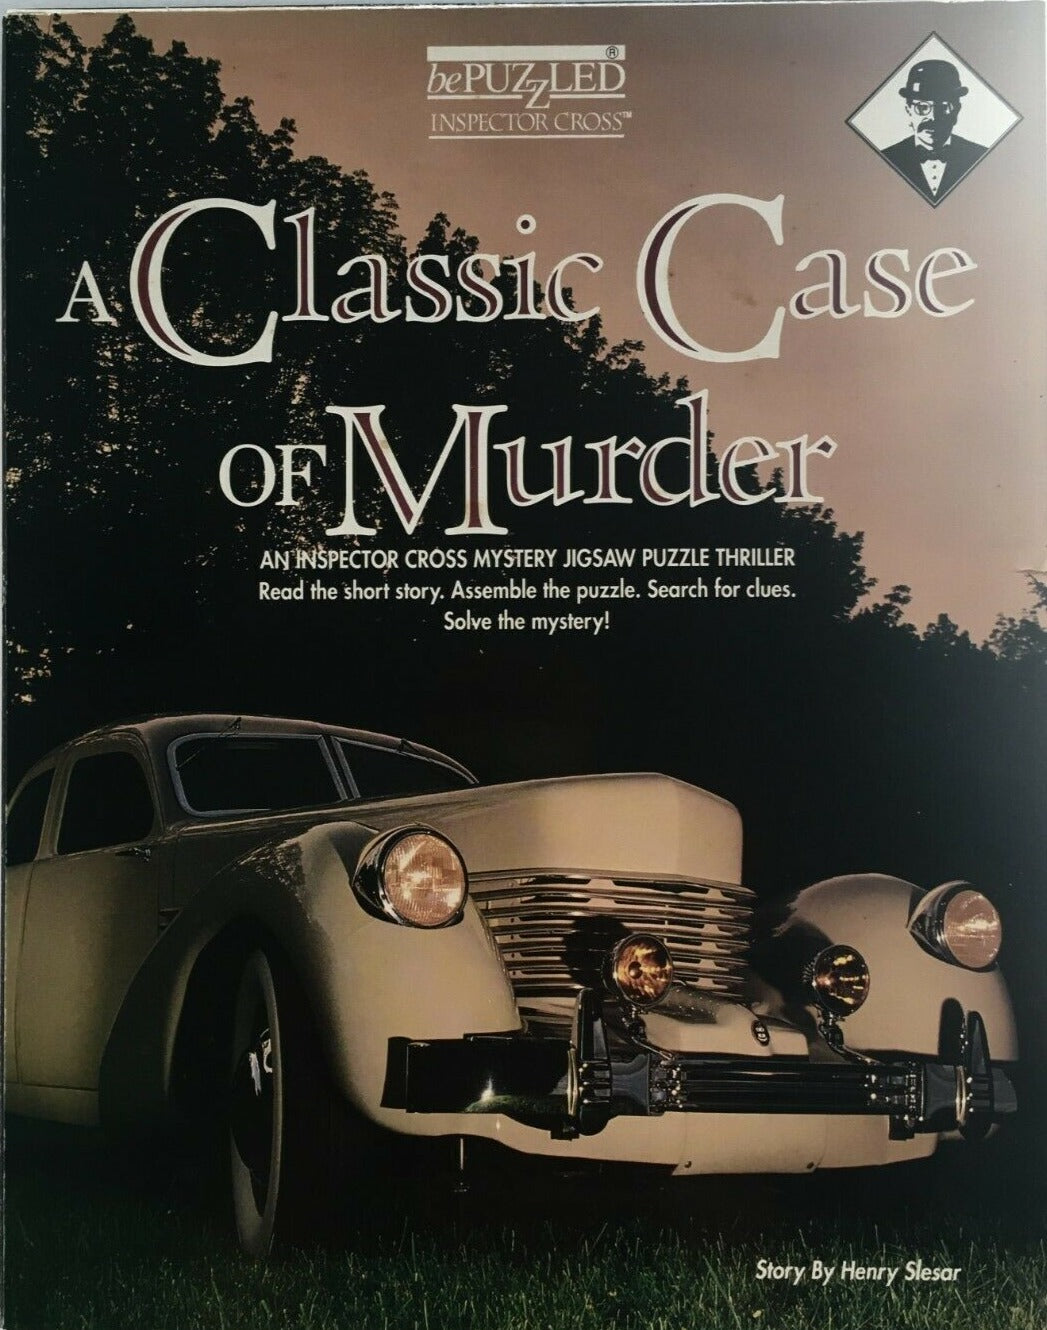 Rental - Conundrum House. bePuzzled - a Classic Case of Murder. An Inspector Cross Mystery Jigsaw Puzzle Thriller Read the short story. Assemble the puzzle. Search for clues. Solve the Mystery! Story by Henry Slesar.